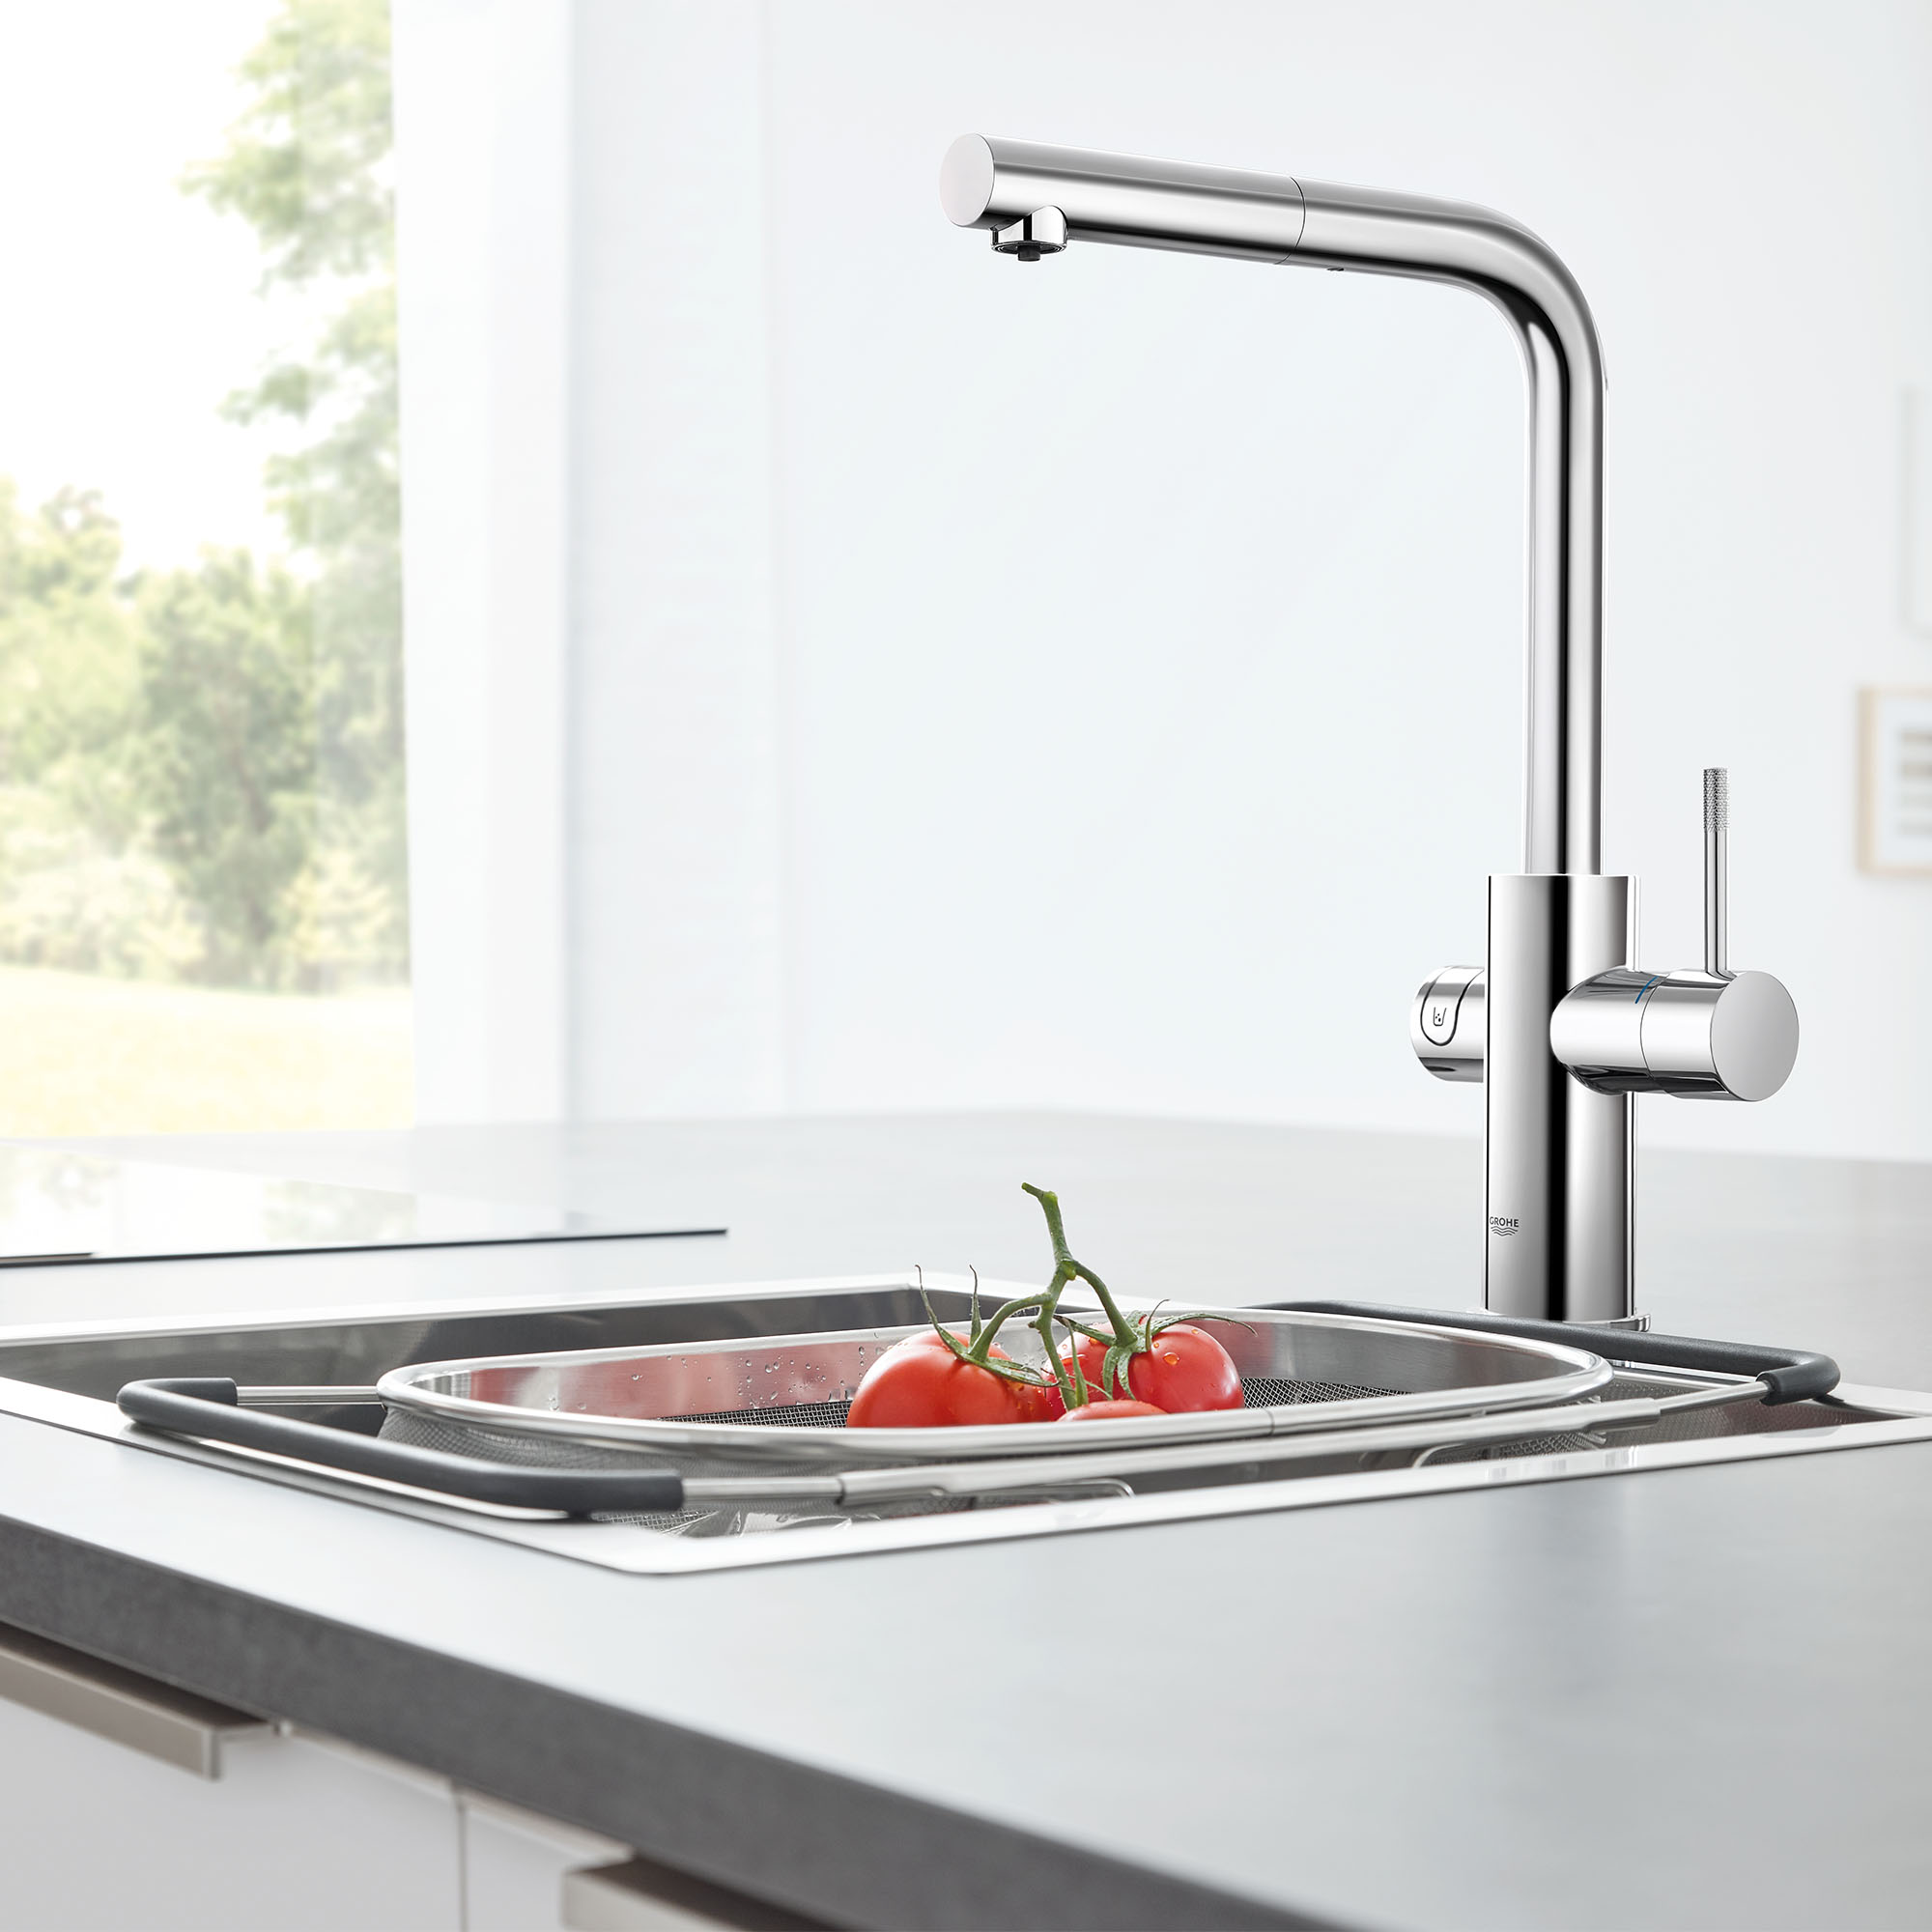 Water carbonator GROHE Blue Fizz brings sparkling water enjoyment into  every home from November